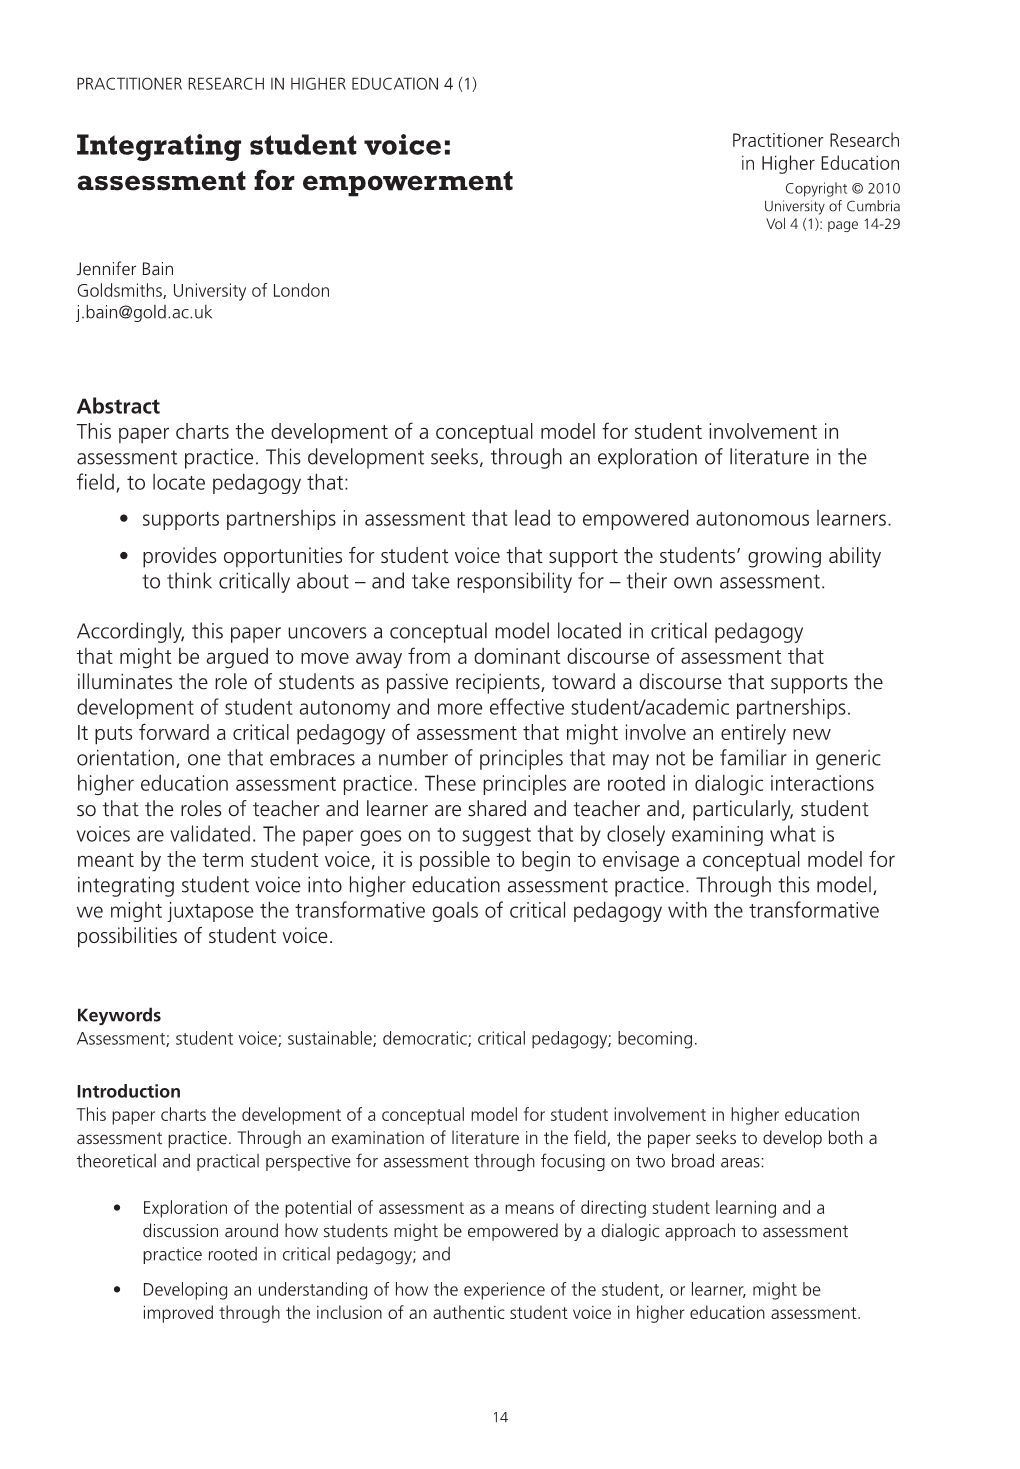 Integrating Student Voice: Practitioner Research in Higher Education Assessment for Empowerment Copyright © 2010 University of Cumbria Vol 4 (1): Page 14-29